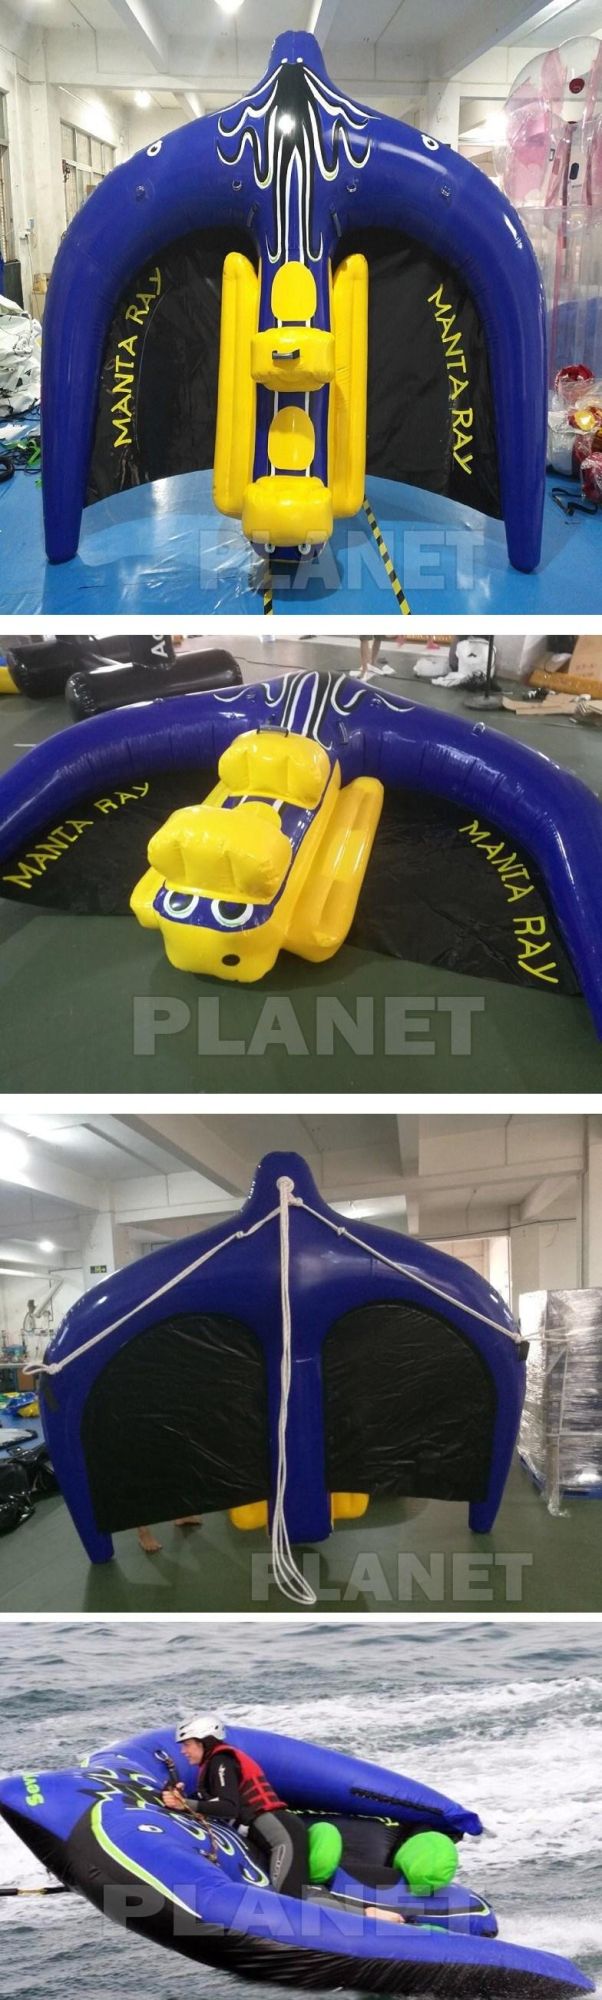 Hot Sale Outdoor Summer Floating Water Inflatable Flying Ray Manta Towable Fish